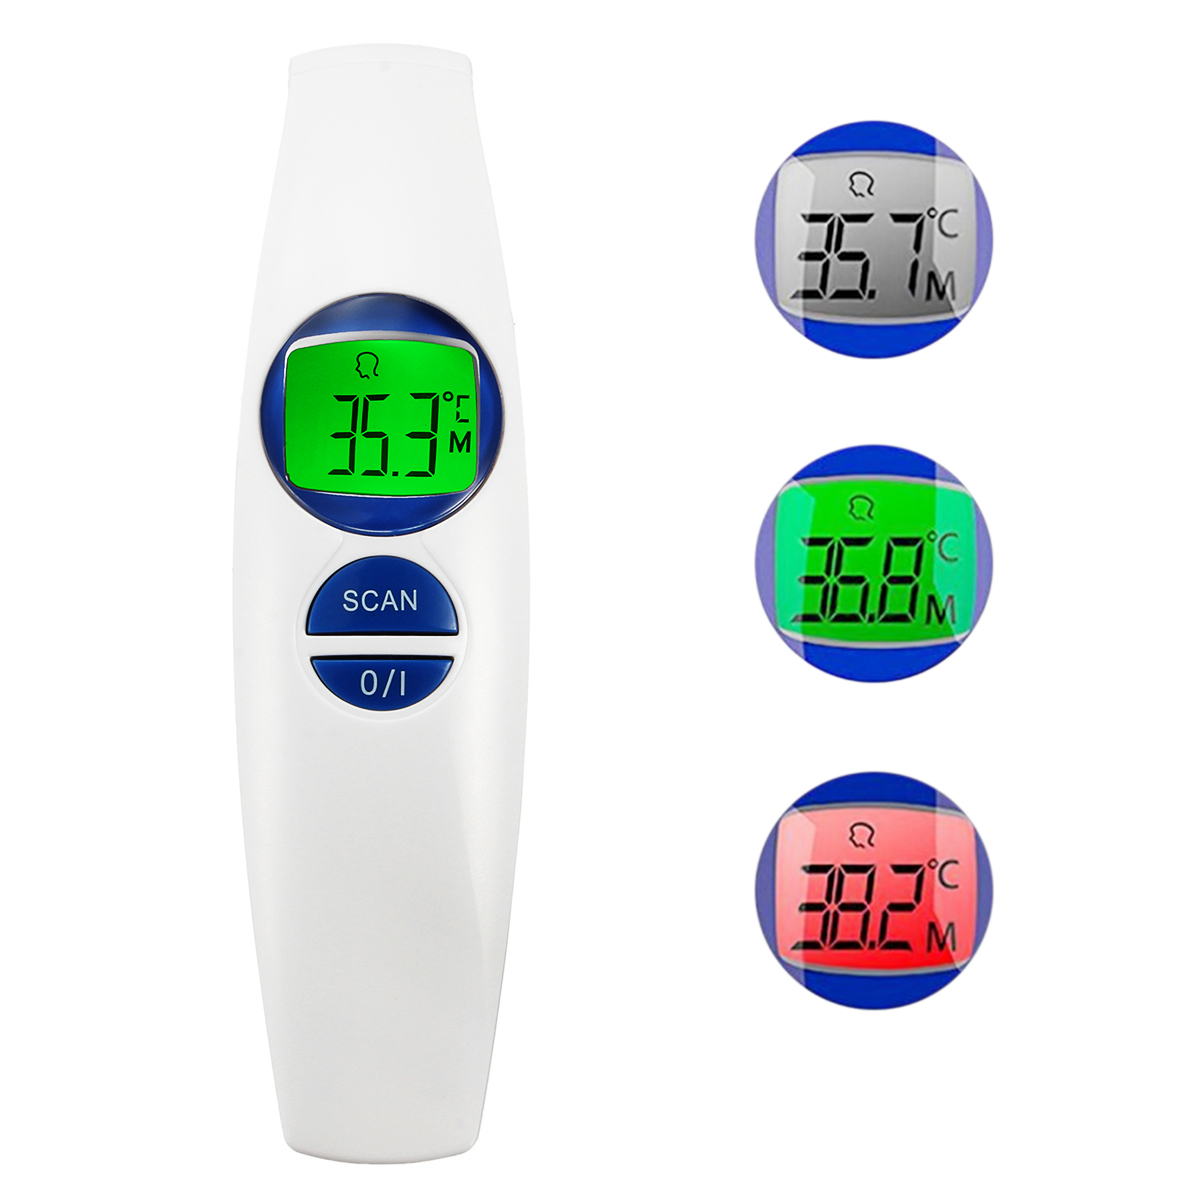 

Loskii FR-800 Digital Infrared Thermometer Non-contact Forehead Body Surface Object Temperature Measurement Safe Baby Termometro Alarm Function